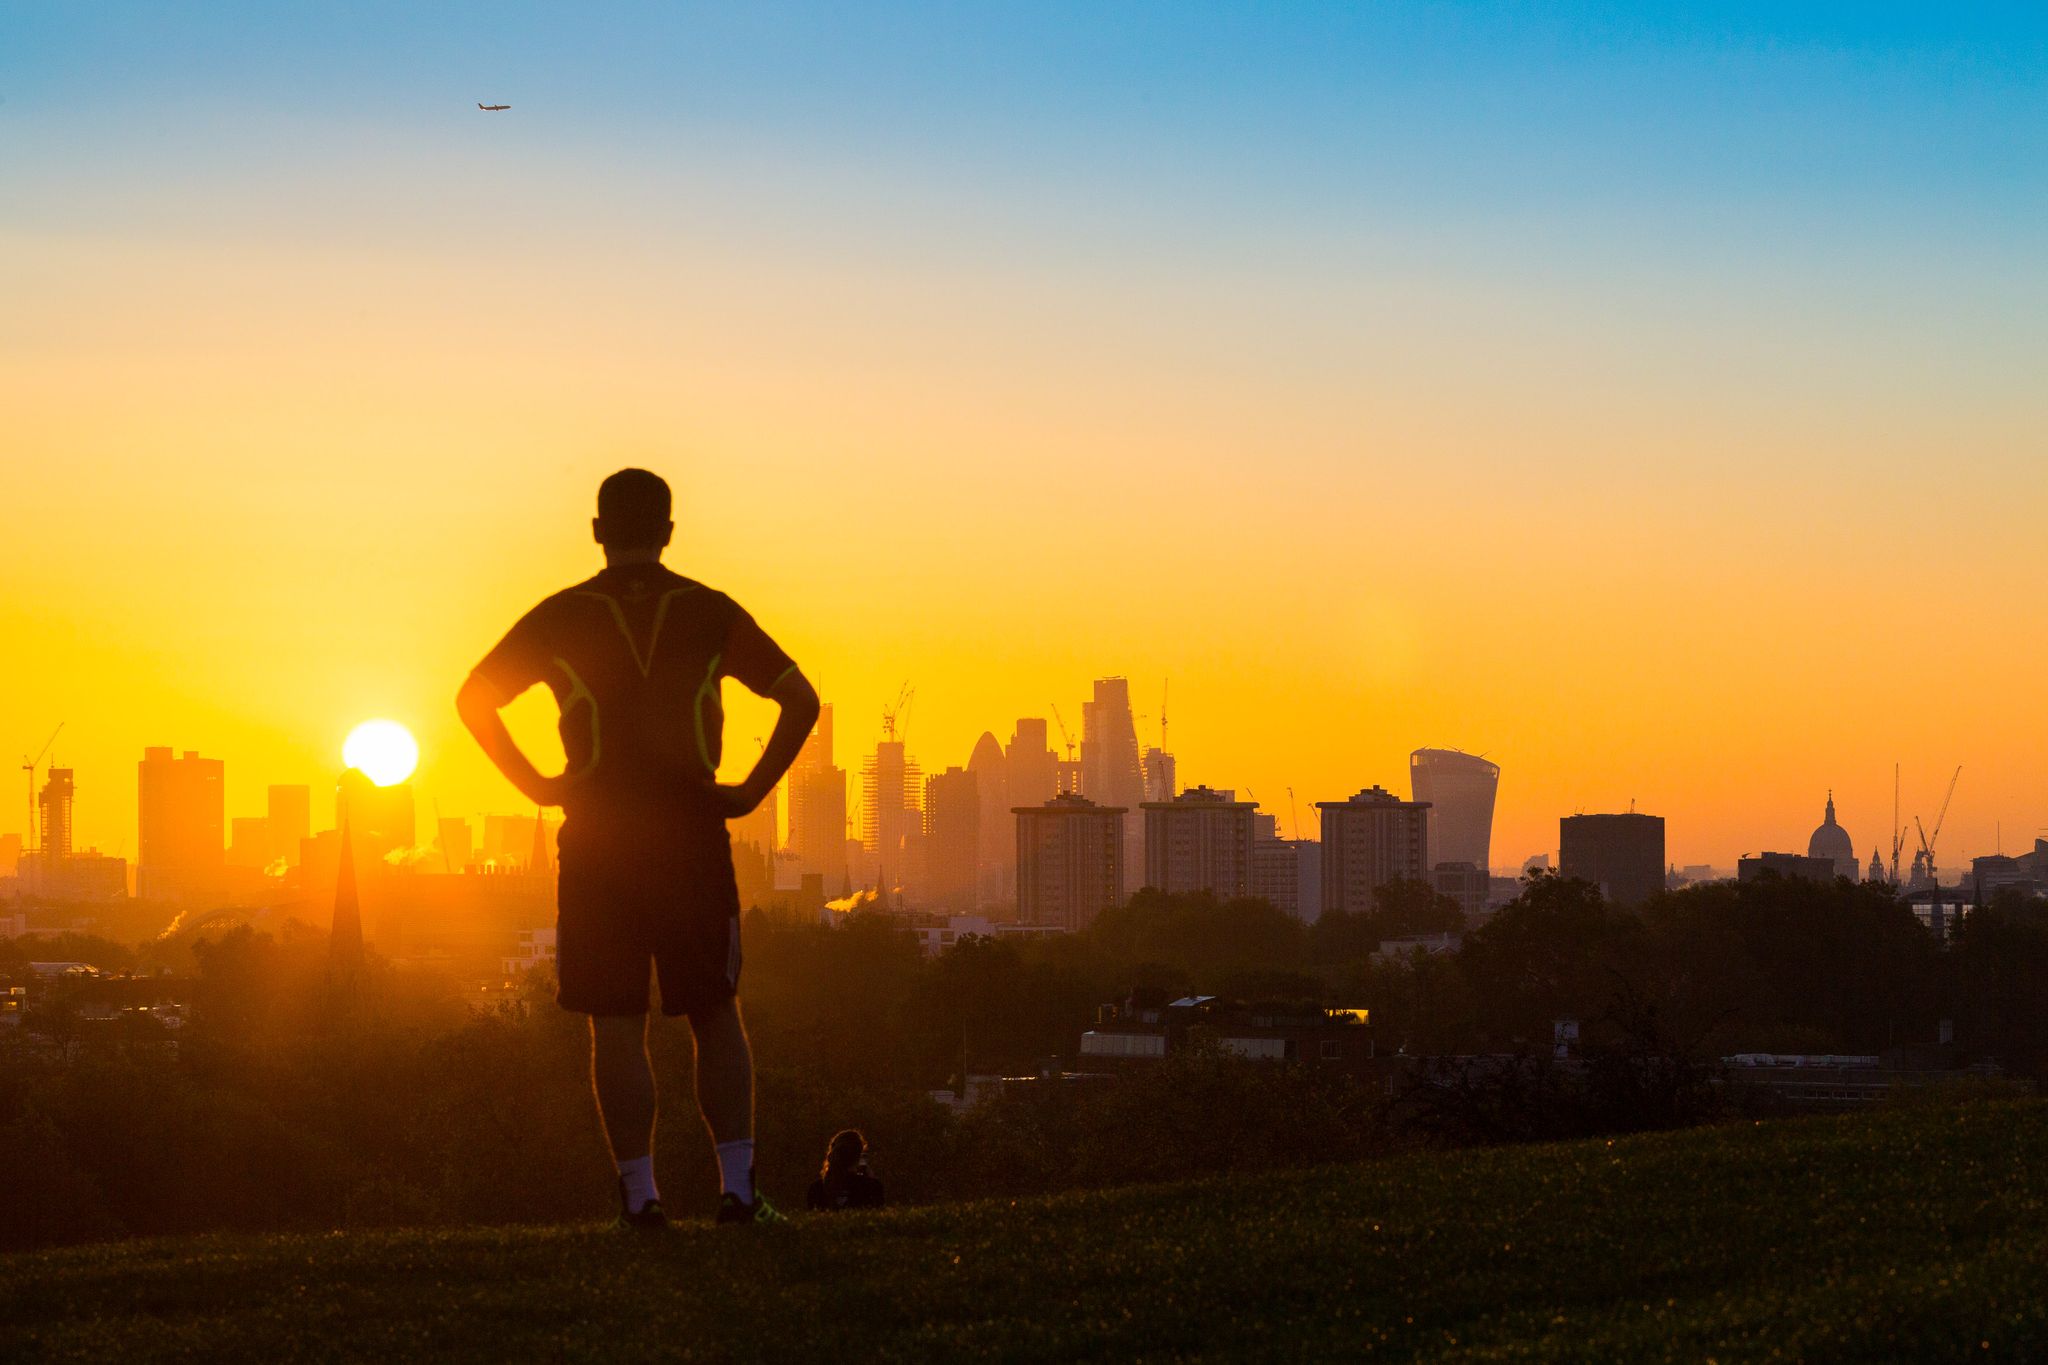 london, united kingdom   october 27 walkers on primrose hill are silhouetted against the rising sun as the day breaks over londons skyline on october 27, 2017 in london, england 

photograph by paul davey  barcroft images photo credit should read paul davey  barcroft media via getty images